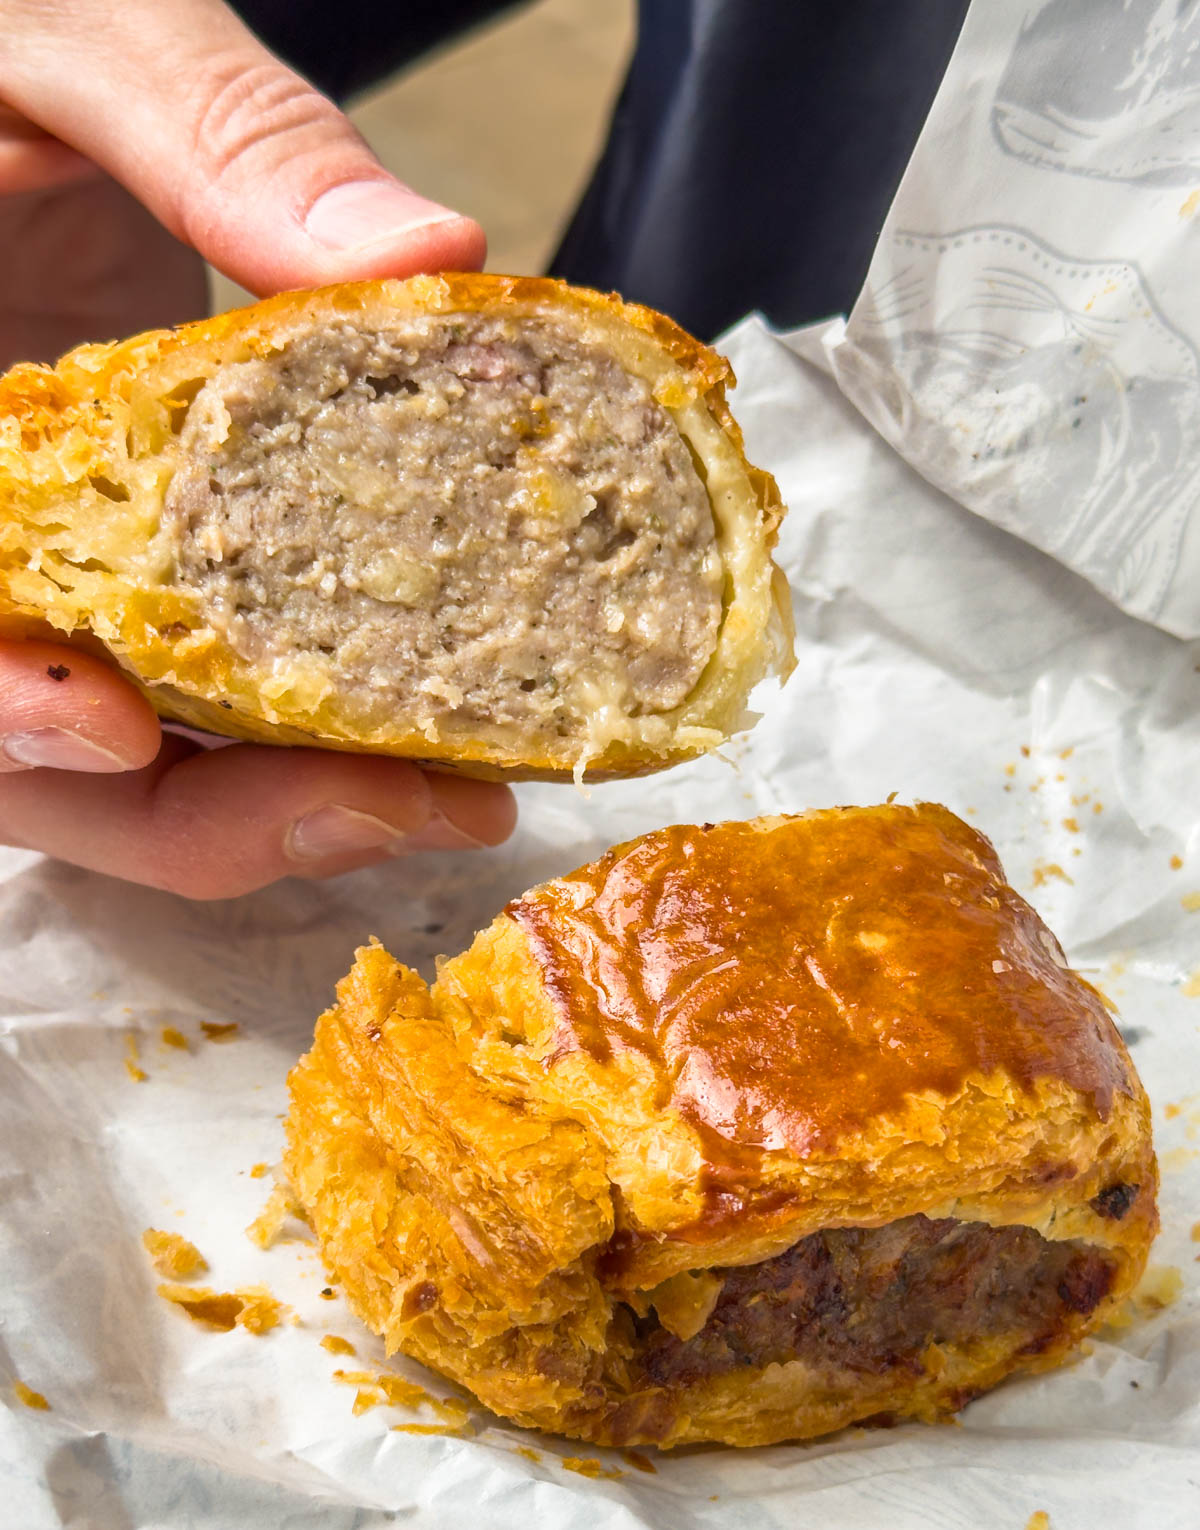 A sausage roll has been cut in half and is being held up to show the filling.